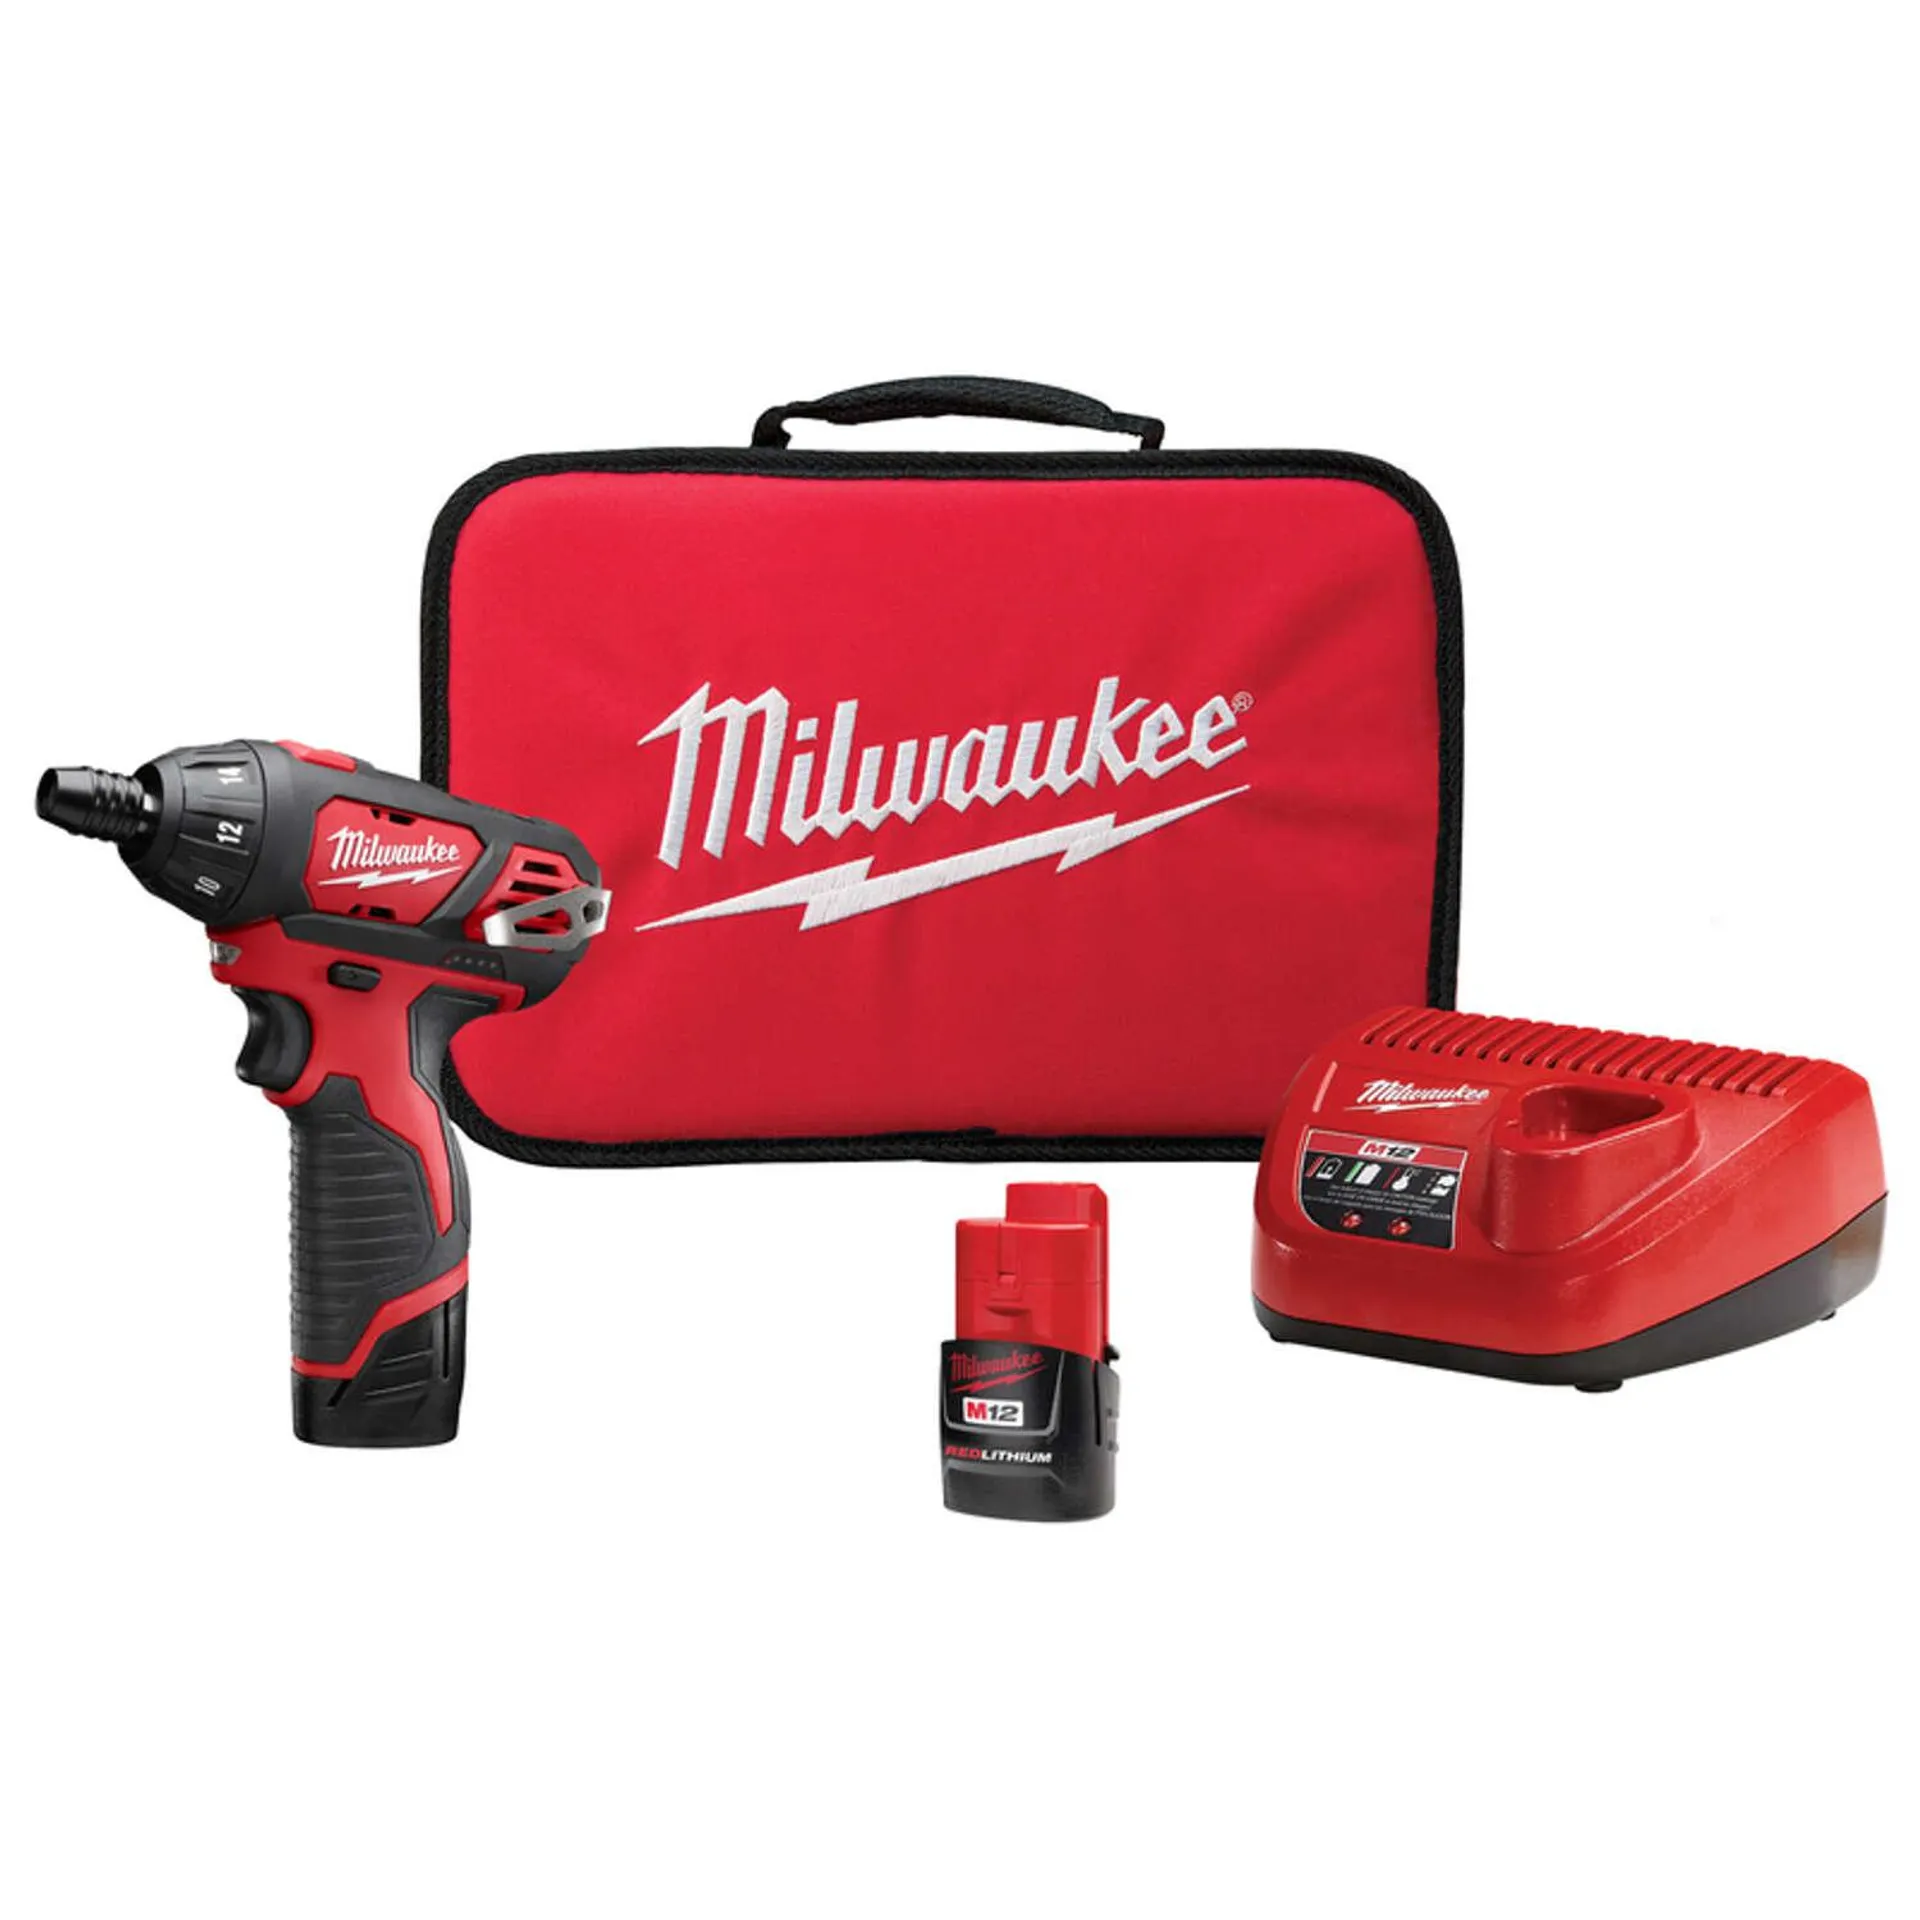 Milwaukee M12 1.5 amps 12 V Brushed Cordless Battery Operated Screwdriver Kit